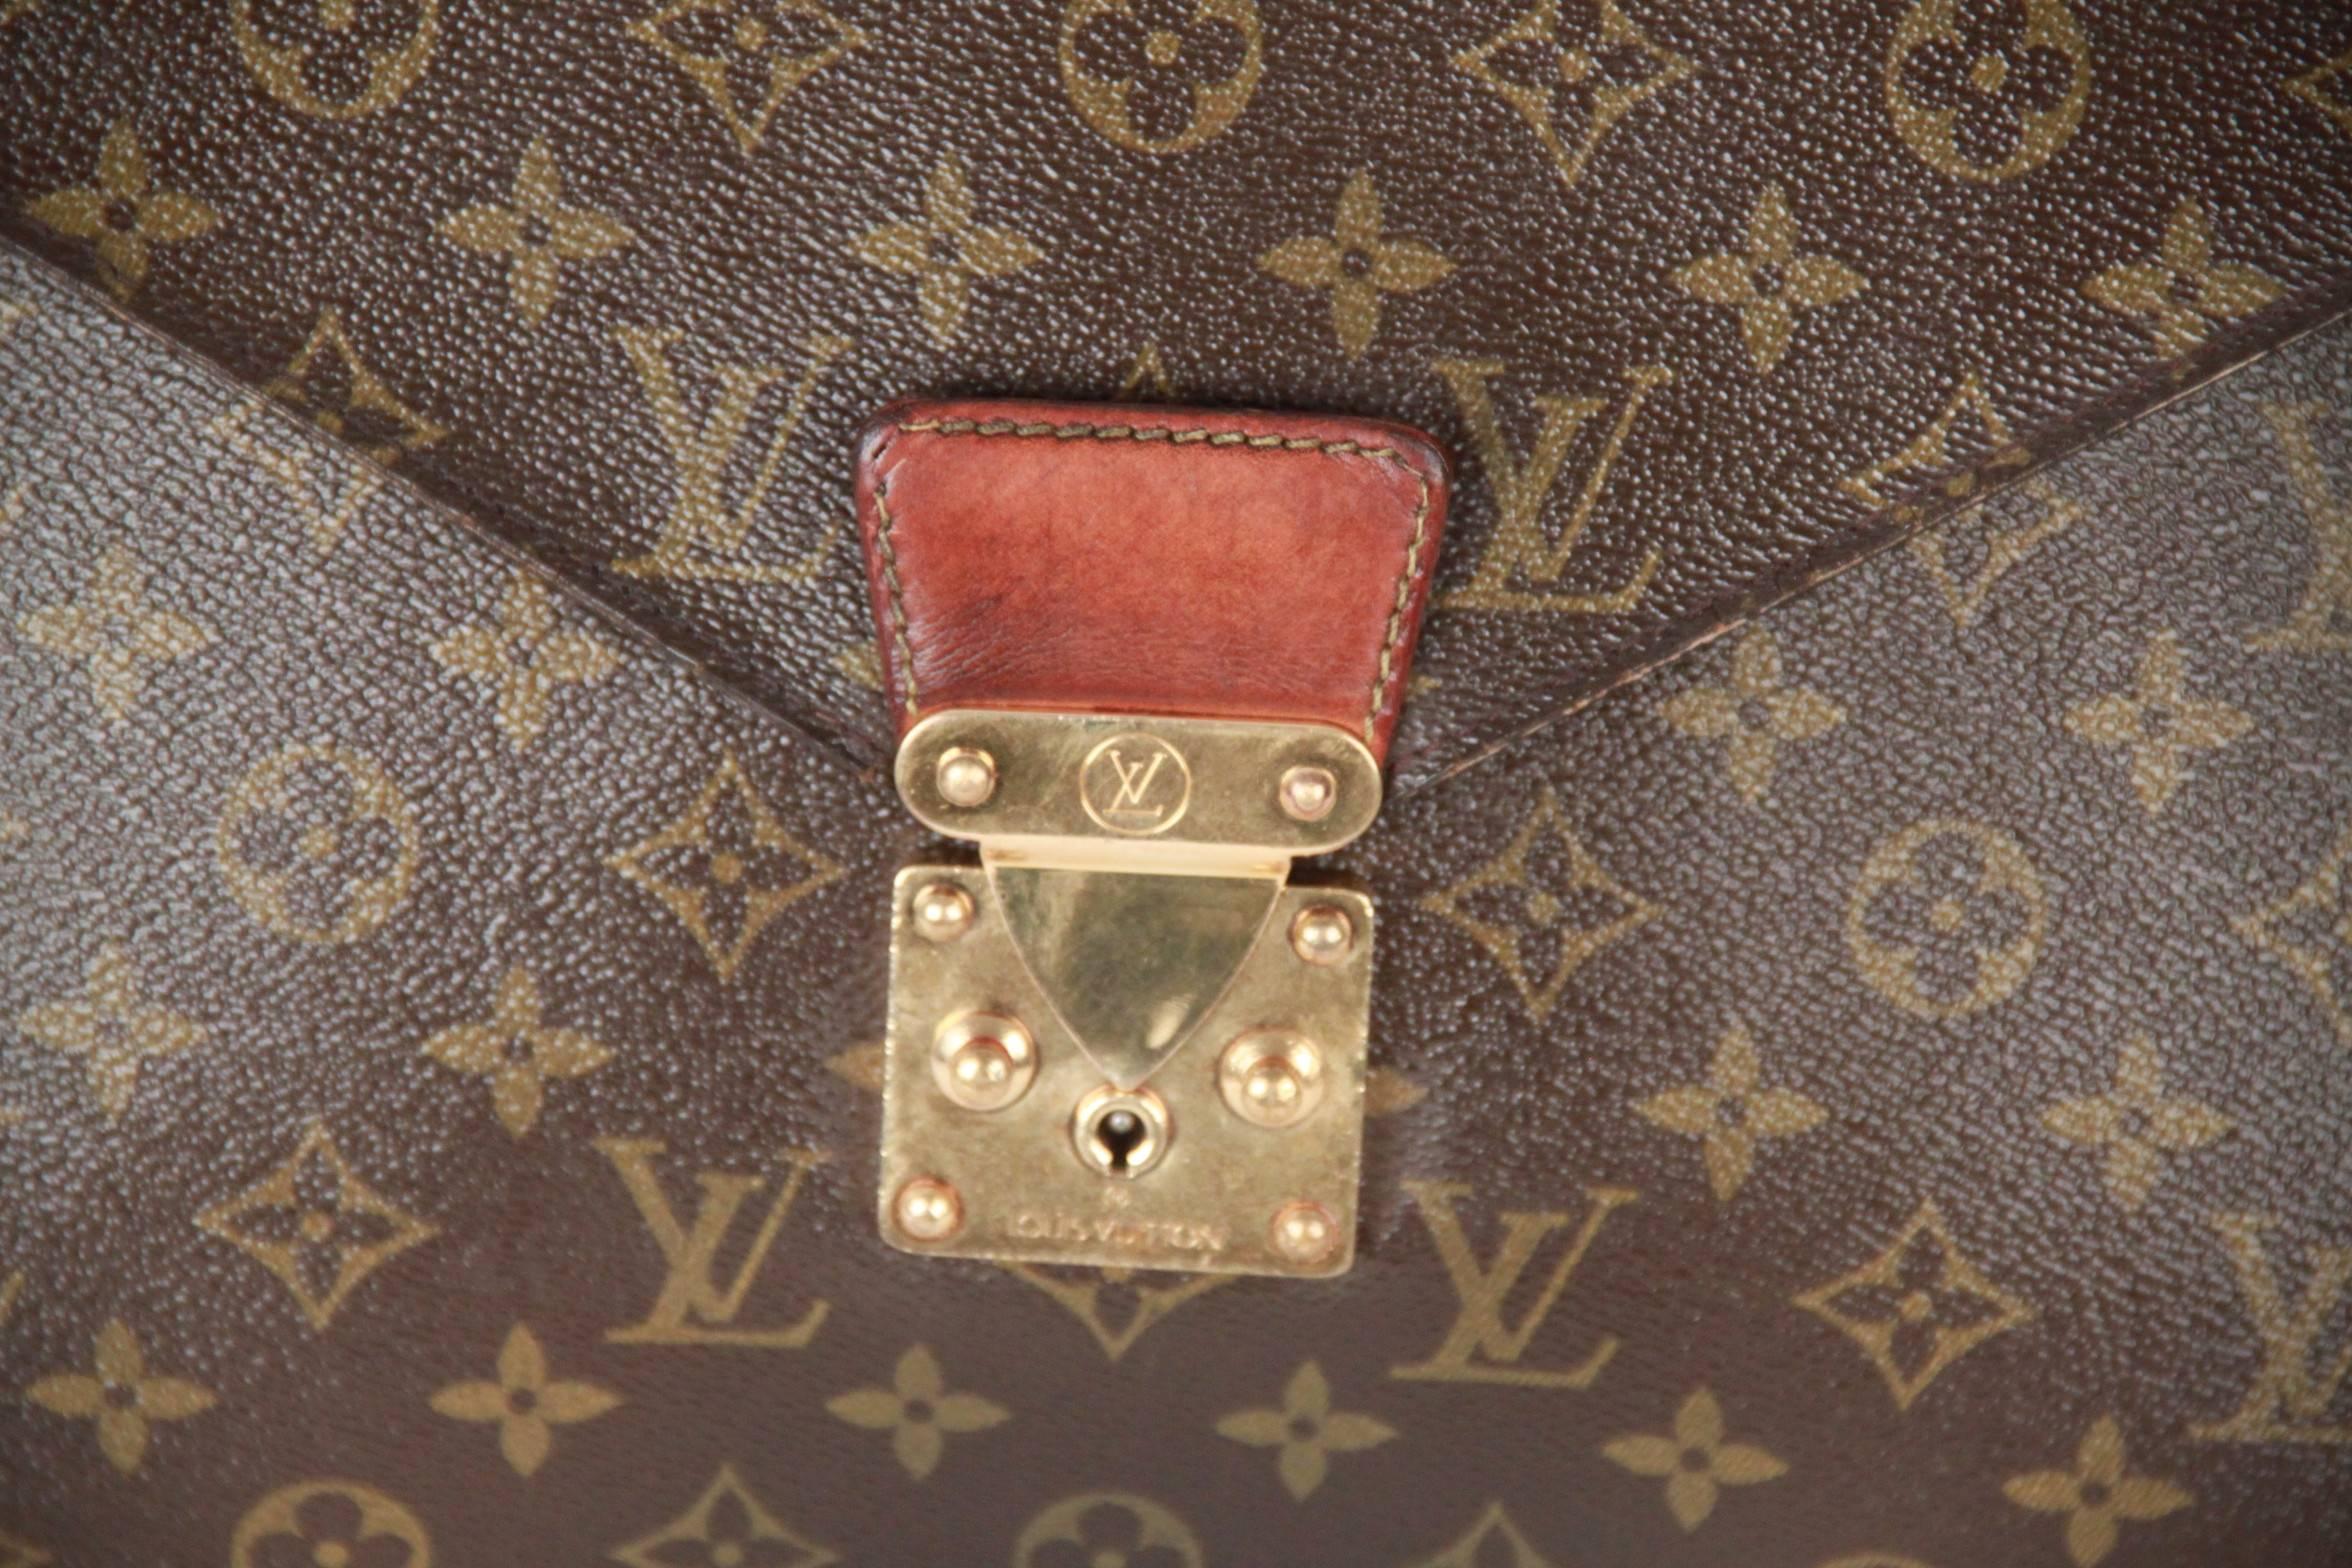 LOUIS VUITTON Monogram SENATEUR Document Holder/Portfolio. The case is a large document holder and is structured of classic Louis Vuitton monogram on canvas. It features a frontal flap with a polished brass s-lock. This opens to a brown cross-grain